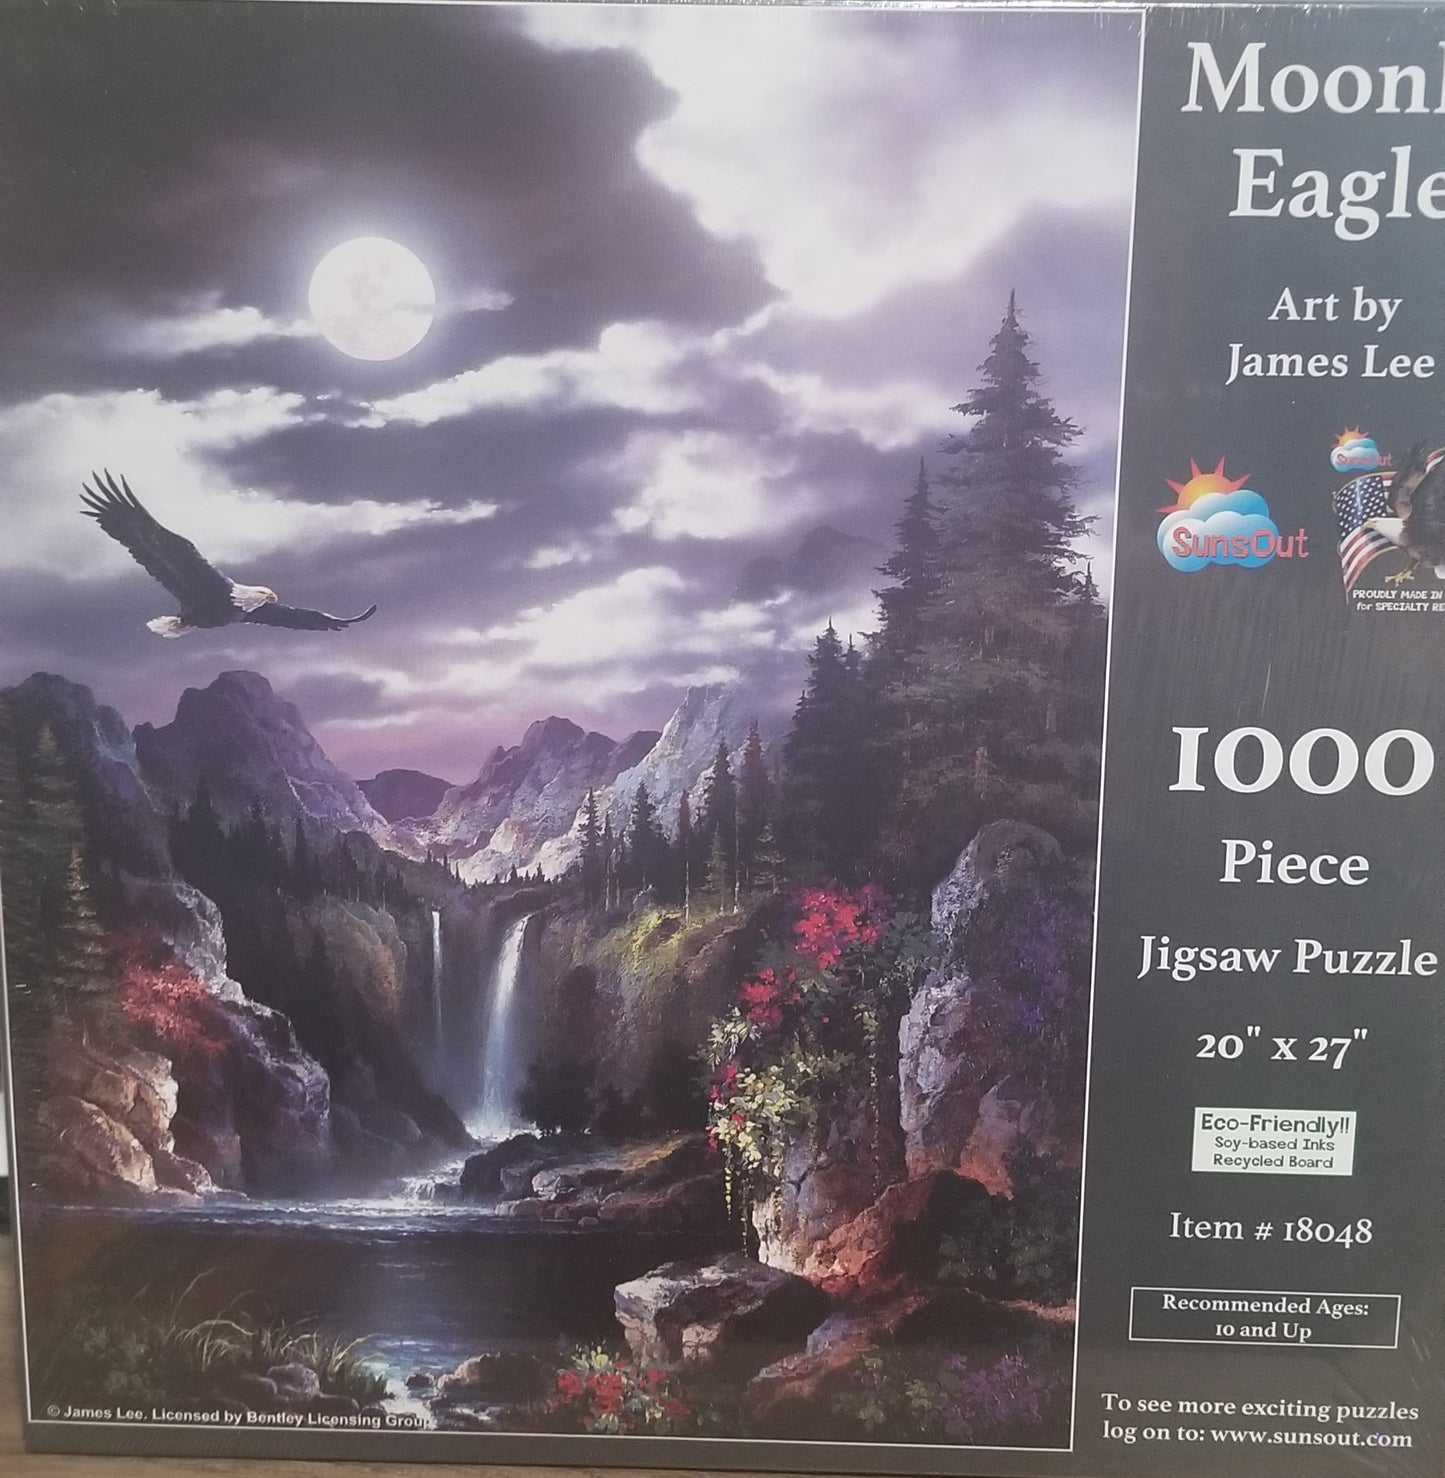 Moonlight Eagle by James Lee, 1000 Piece Puzzle